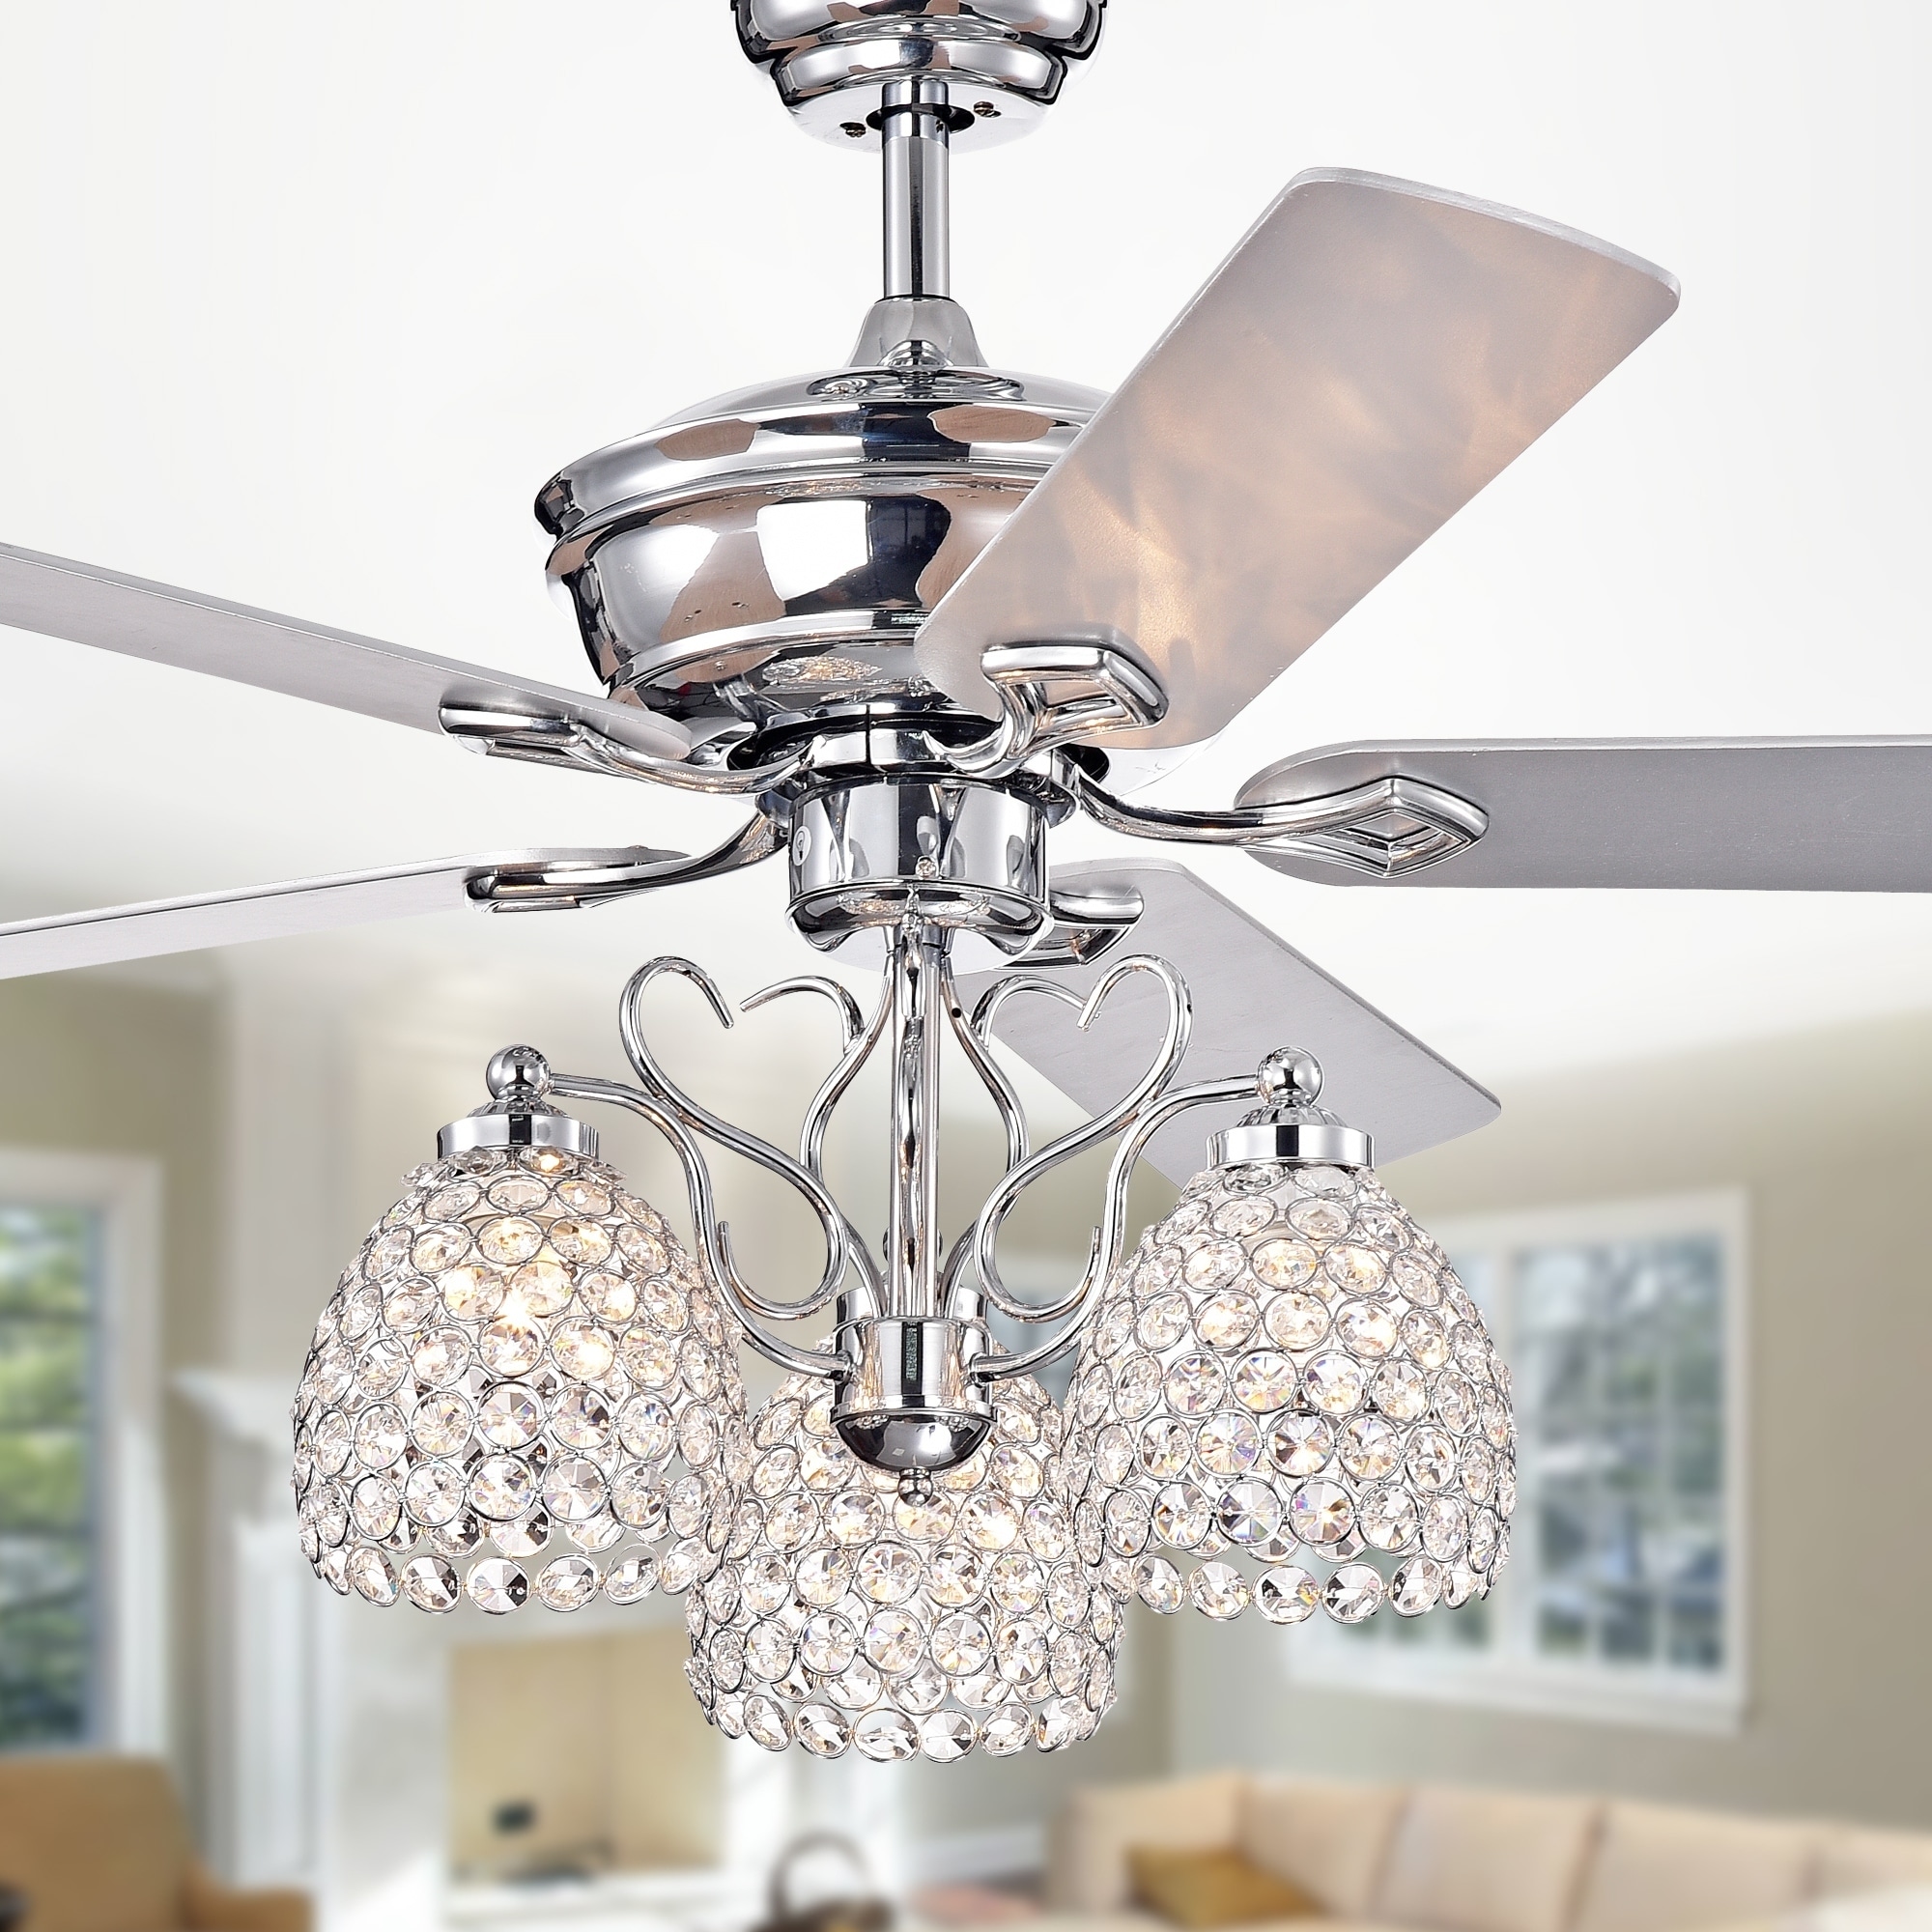 Boffen 52 Inch 3 Light Lighted Ceiling Fan With Crystal Cup Shades